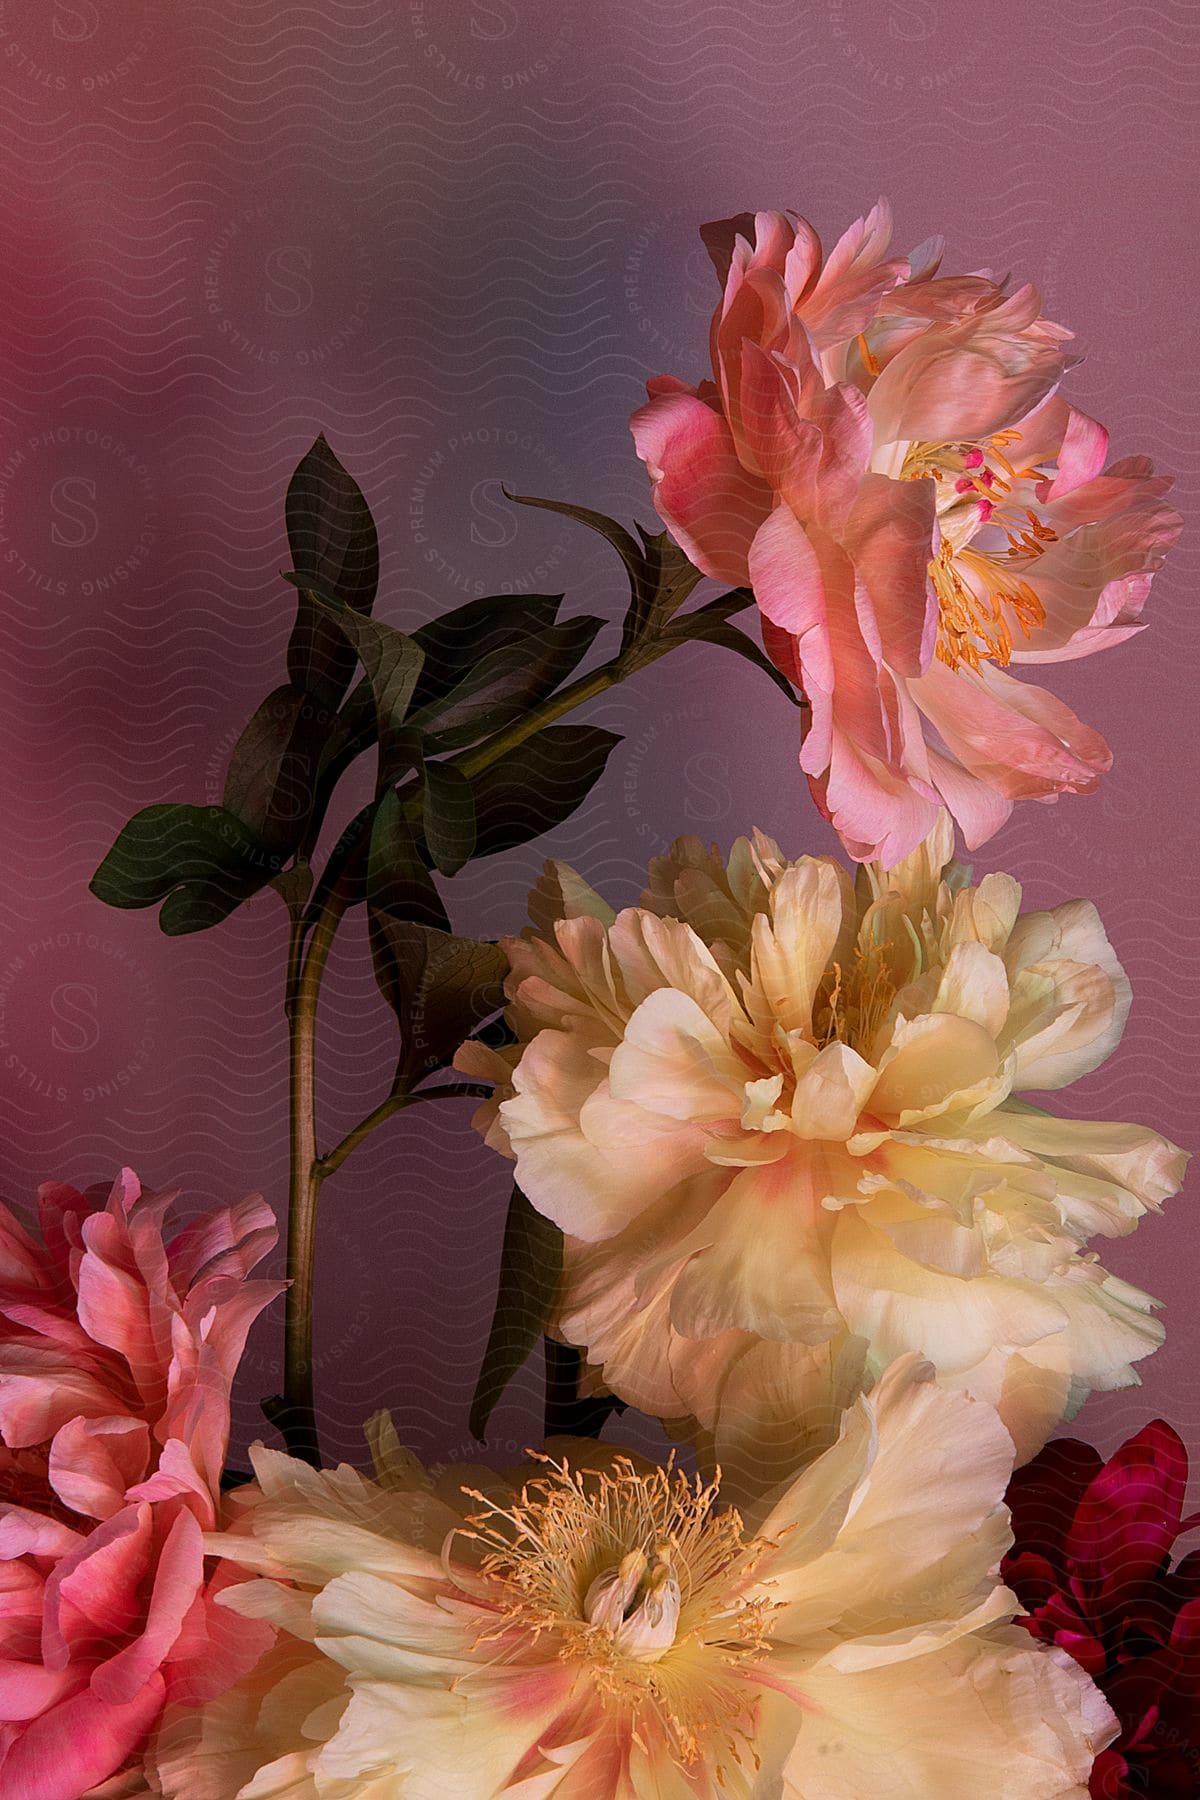 A bouquet of large pink and cream flowers are arranged in front of a pink background.